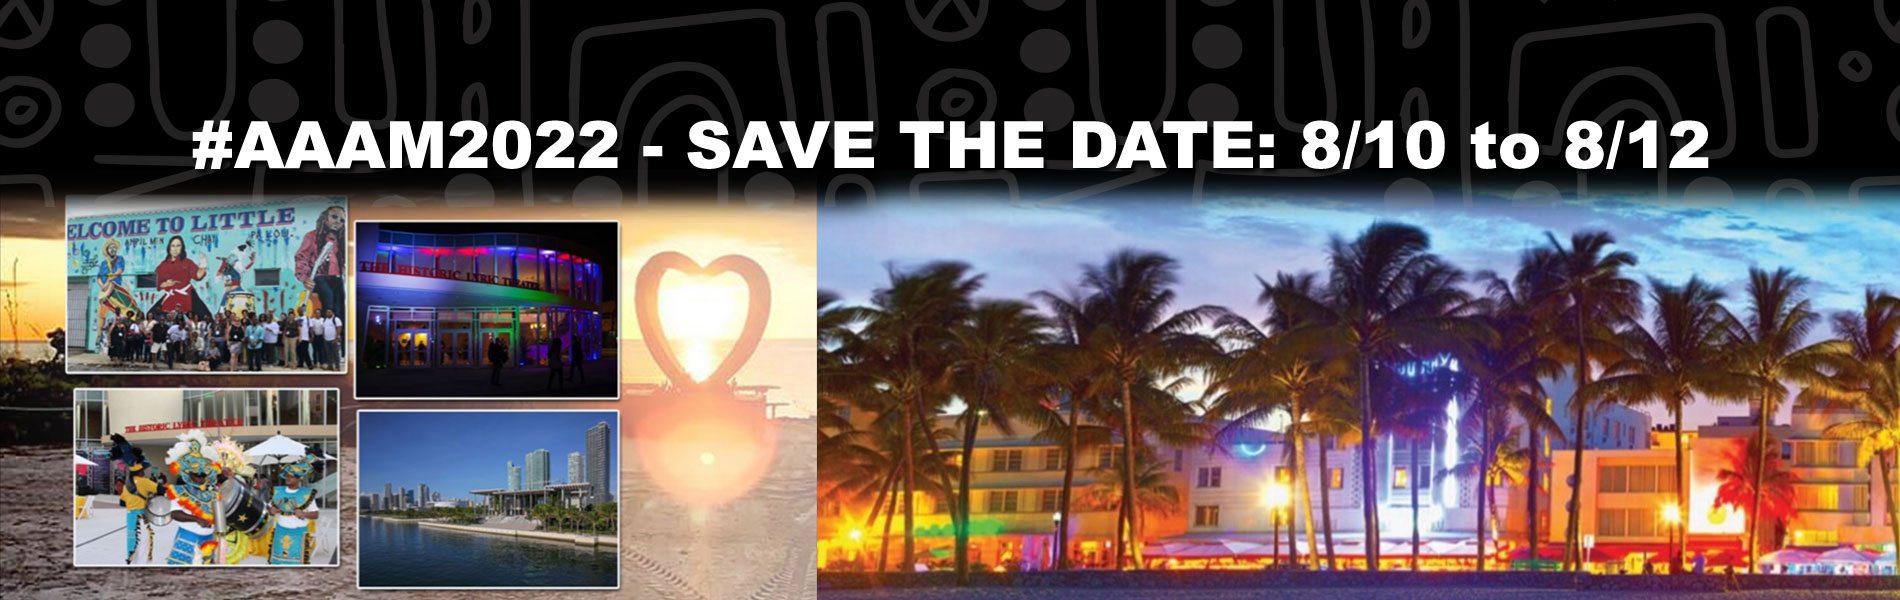 2022 AAAM conference save the date